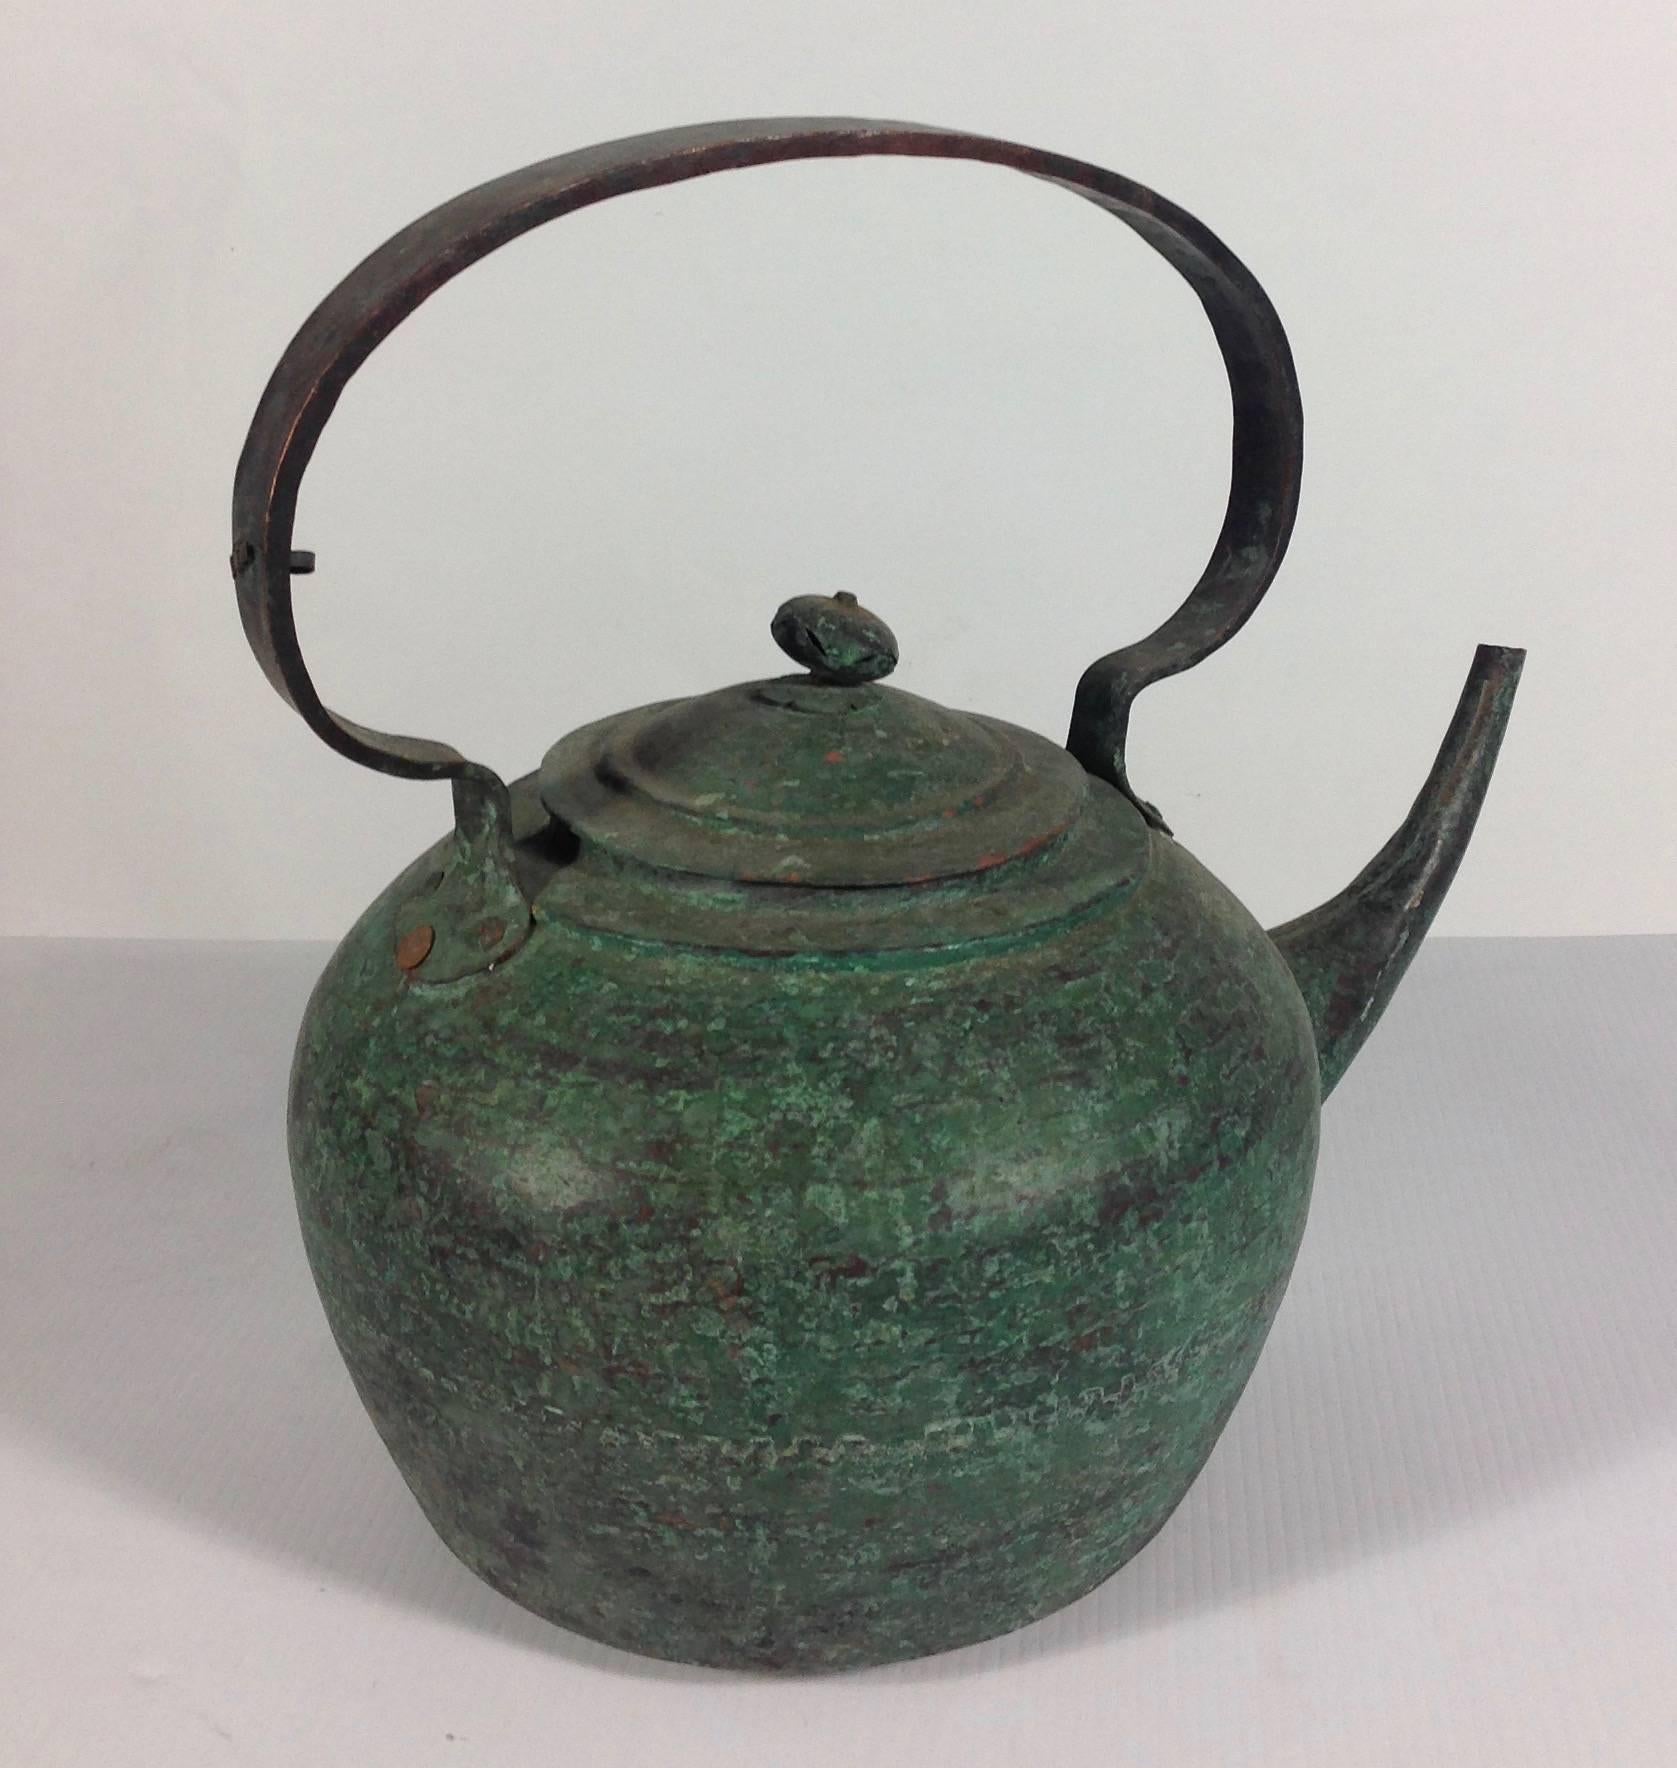 Gorgeous and lyrical Javanese copper kettle from the early 20th century.